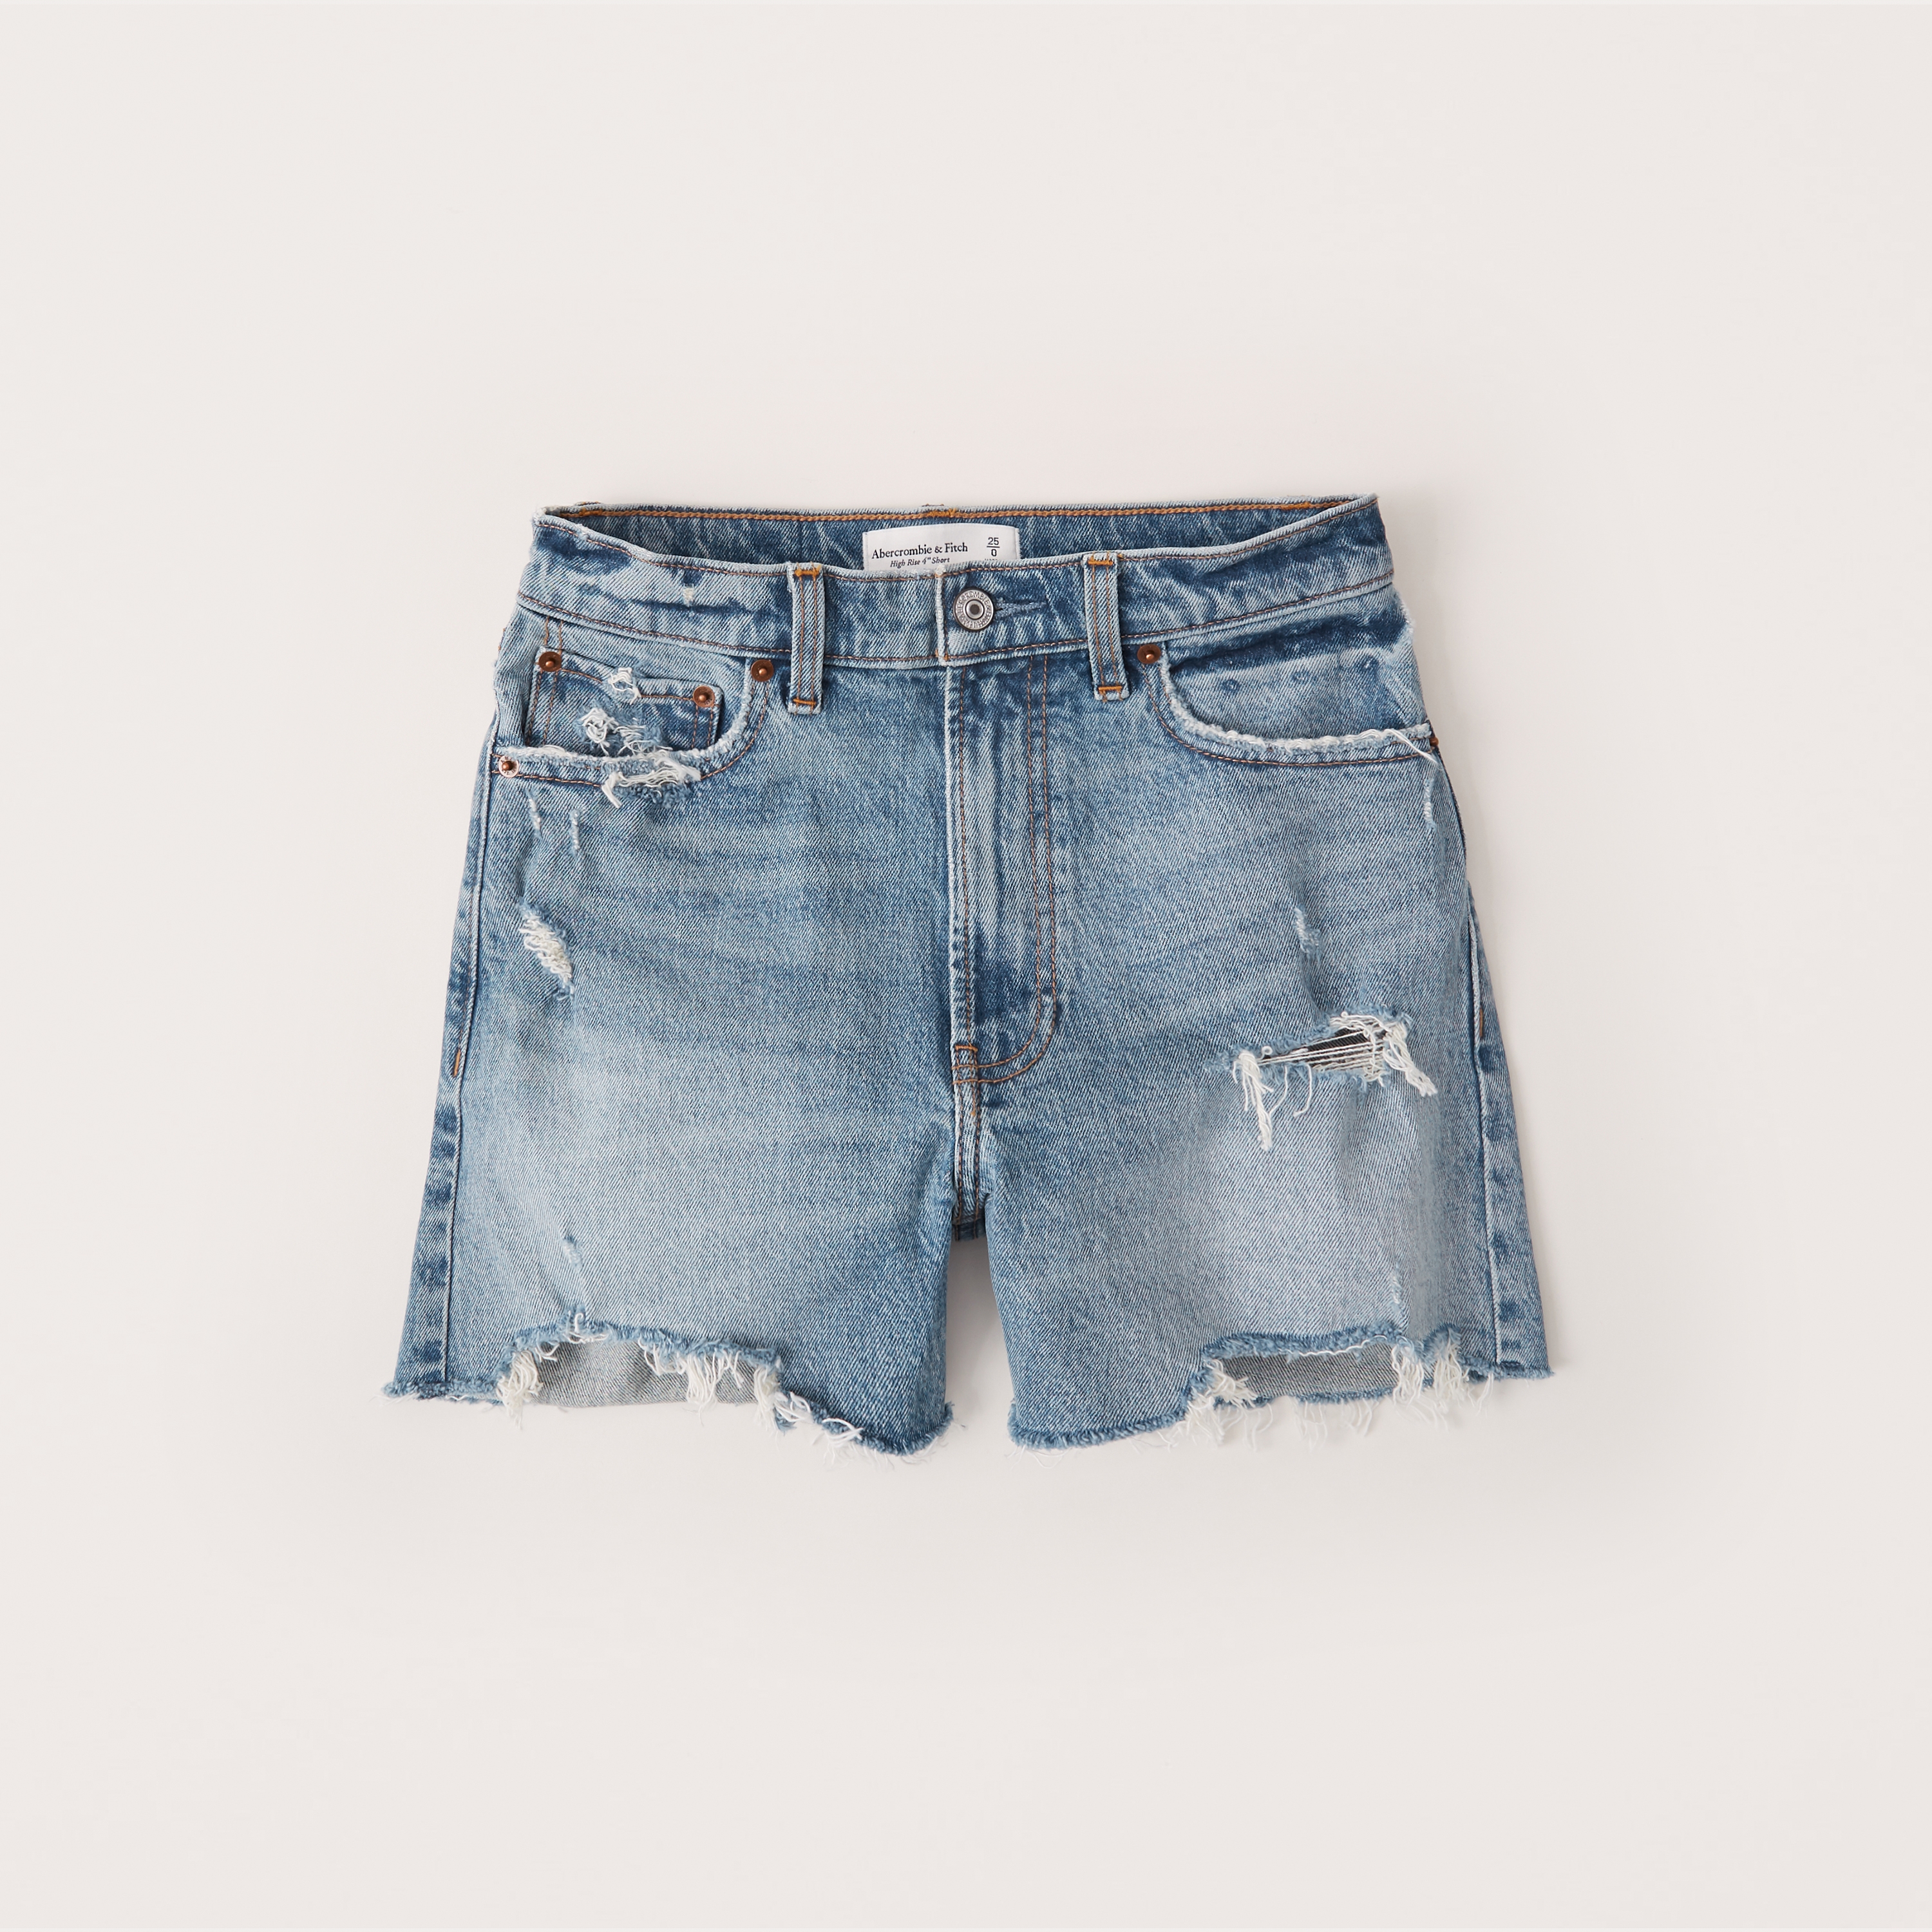 abercrombie and fitch jean shorts